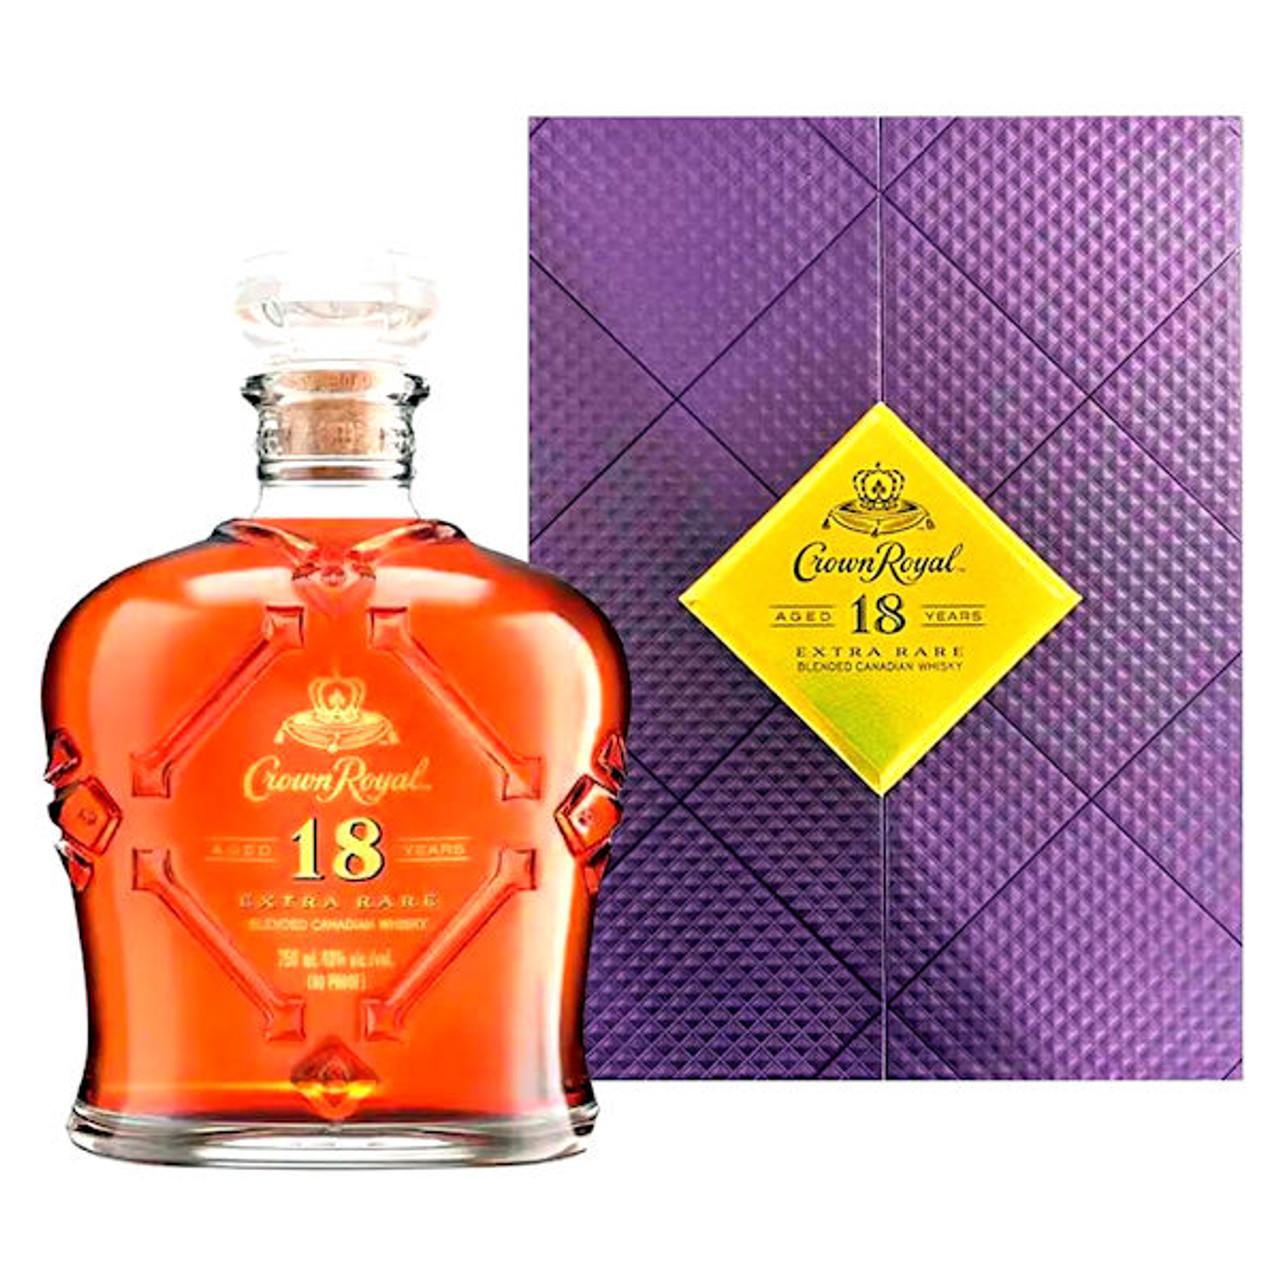 Crown Royal Canadian Whisky 750ml (80 Proof)